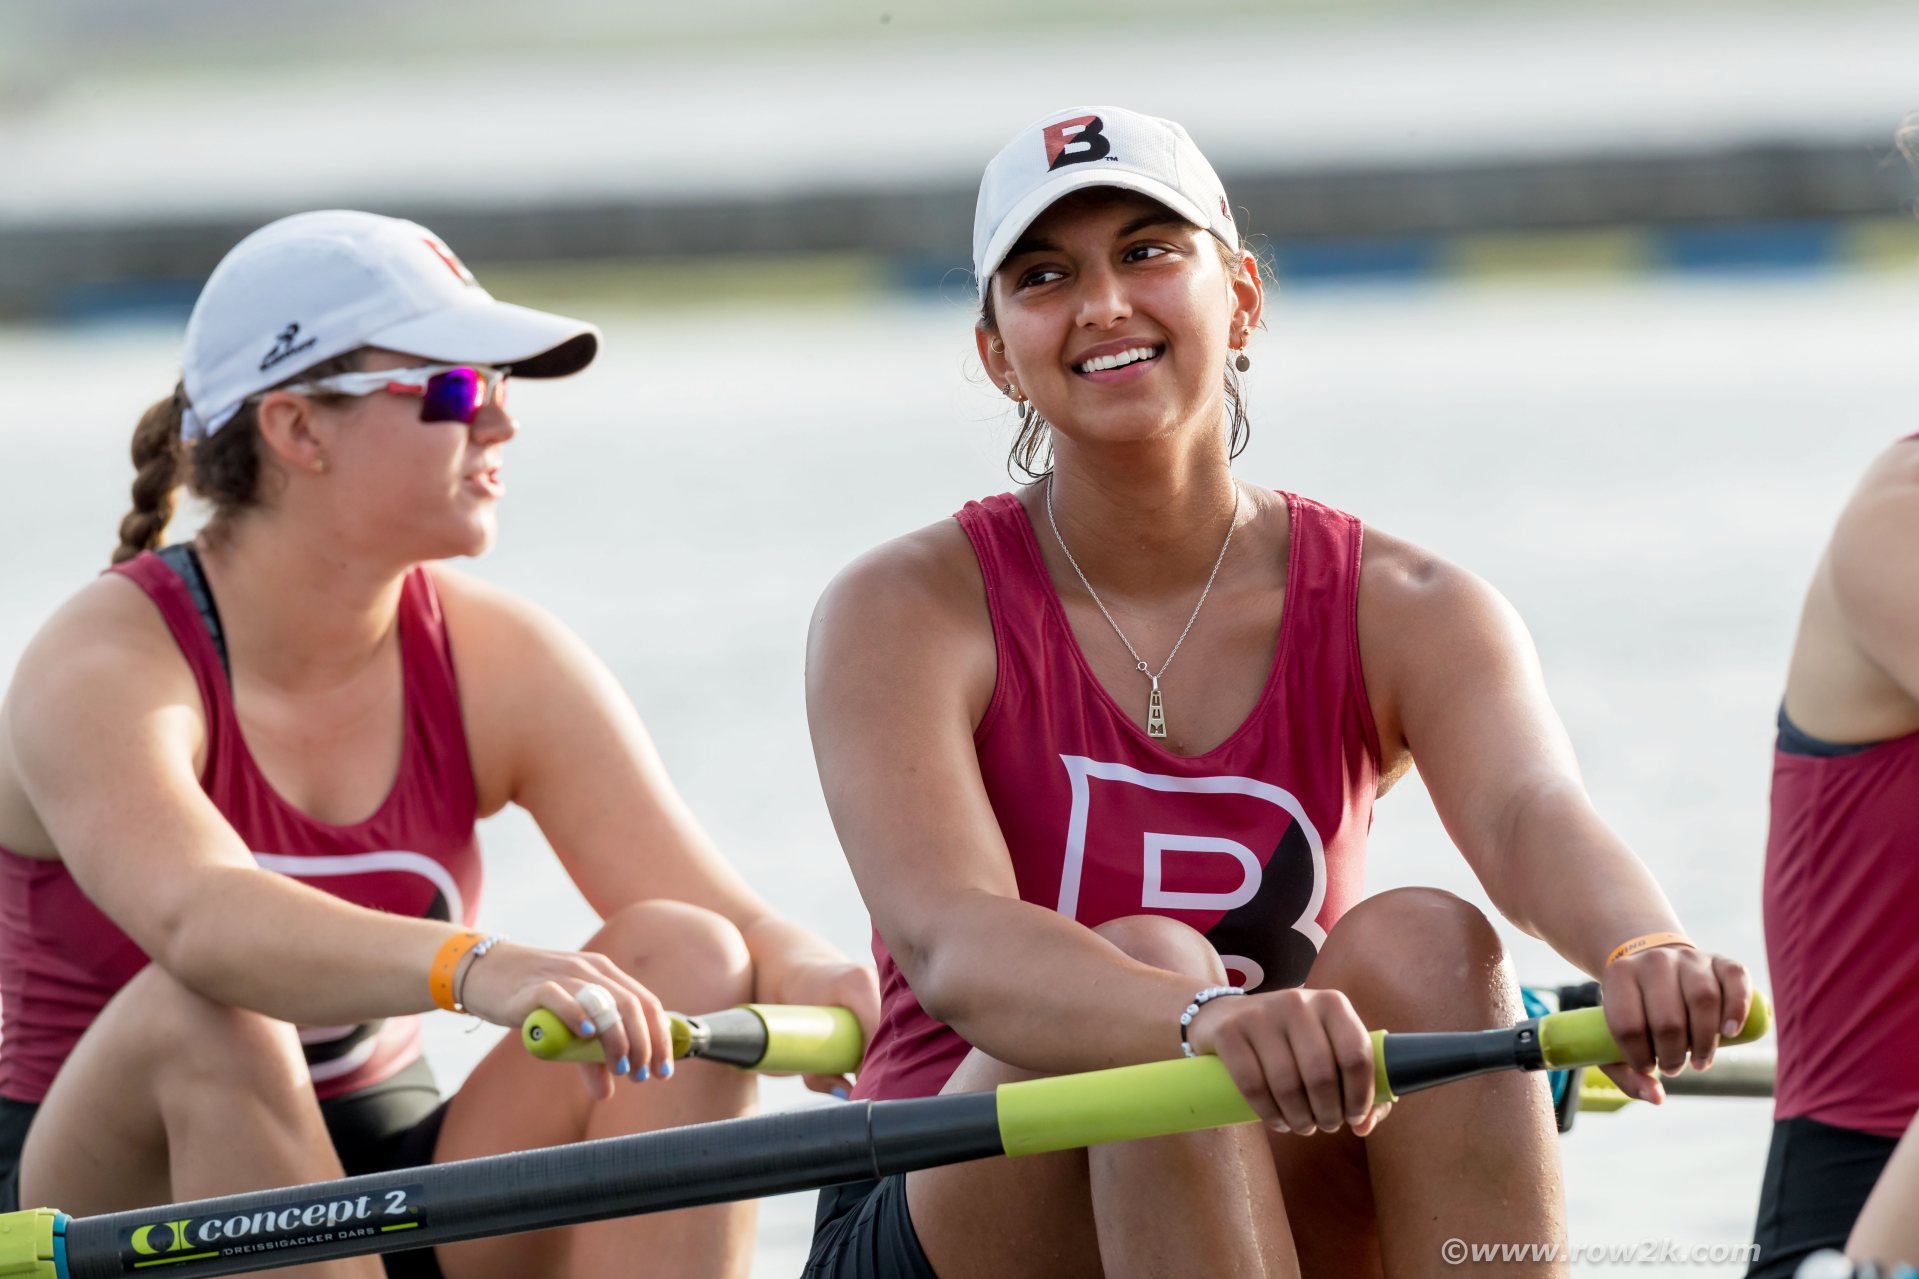 Amelia Wilhelm '18 is shown prior to the second varsity eight's preliminary heat vs. Wellesley, WPI, and Washington College at the NCAA Division III Women's on May 25, 2018. Both Bates boats easily advanced to the finals, both winning their grand finals races the next day to propel Bates to the national championship.
